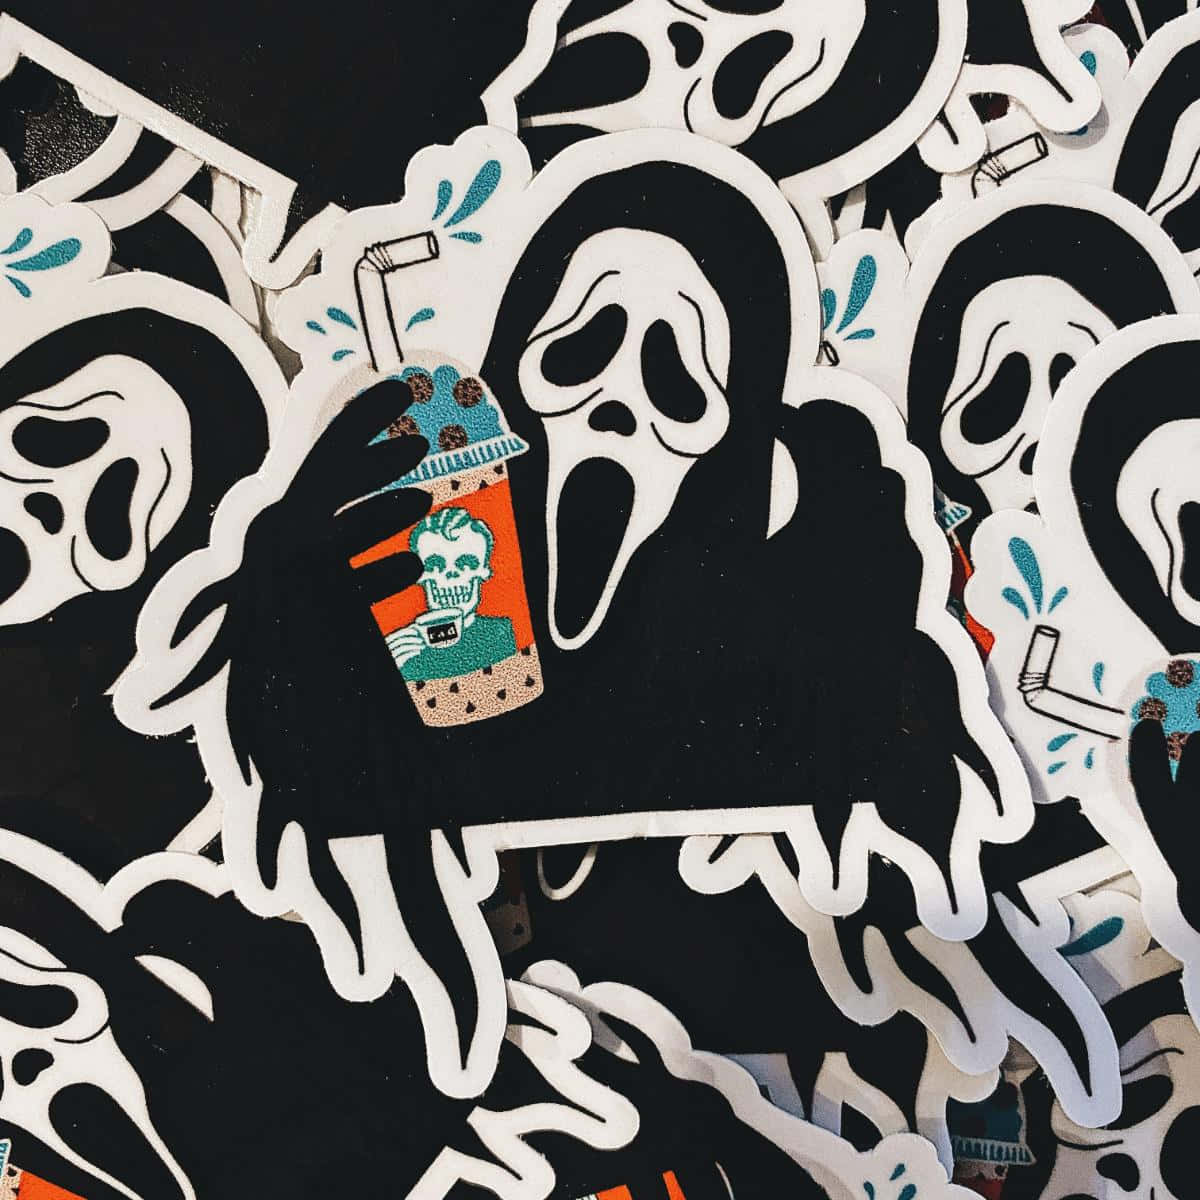 Enter the world of Ghostface